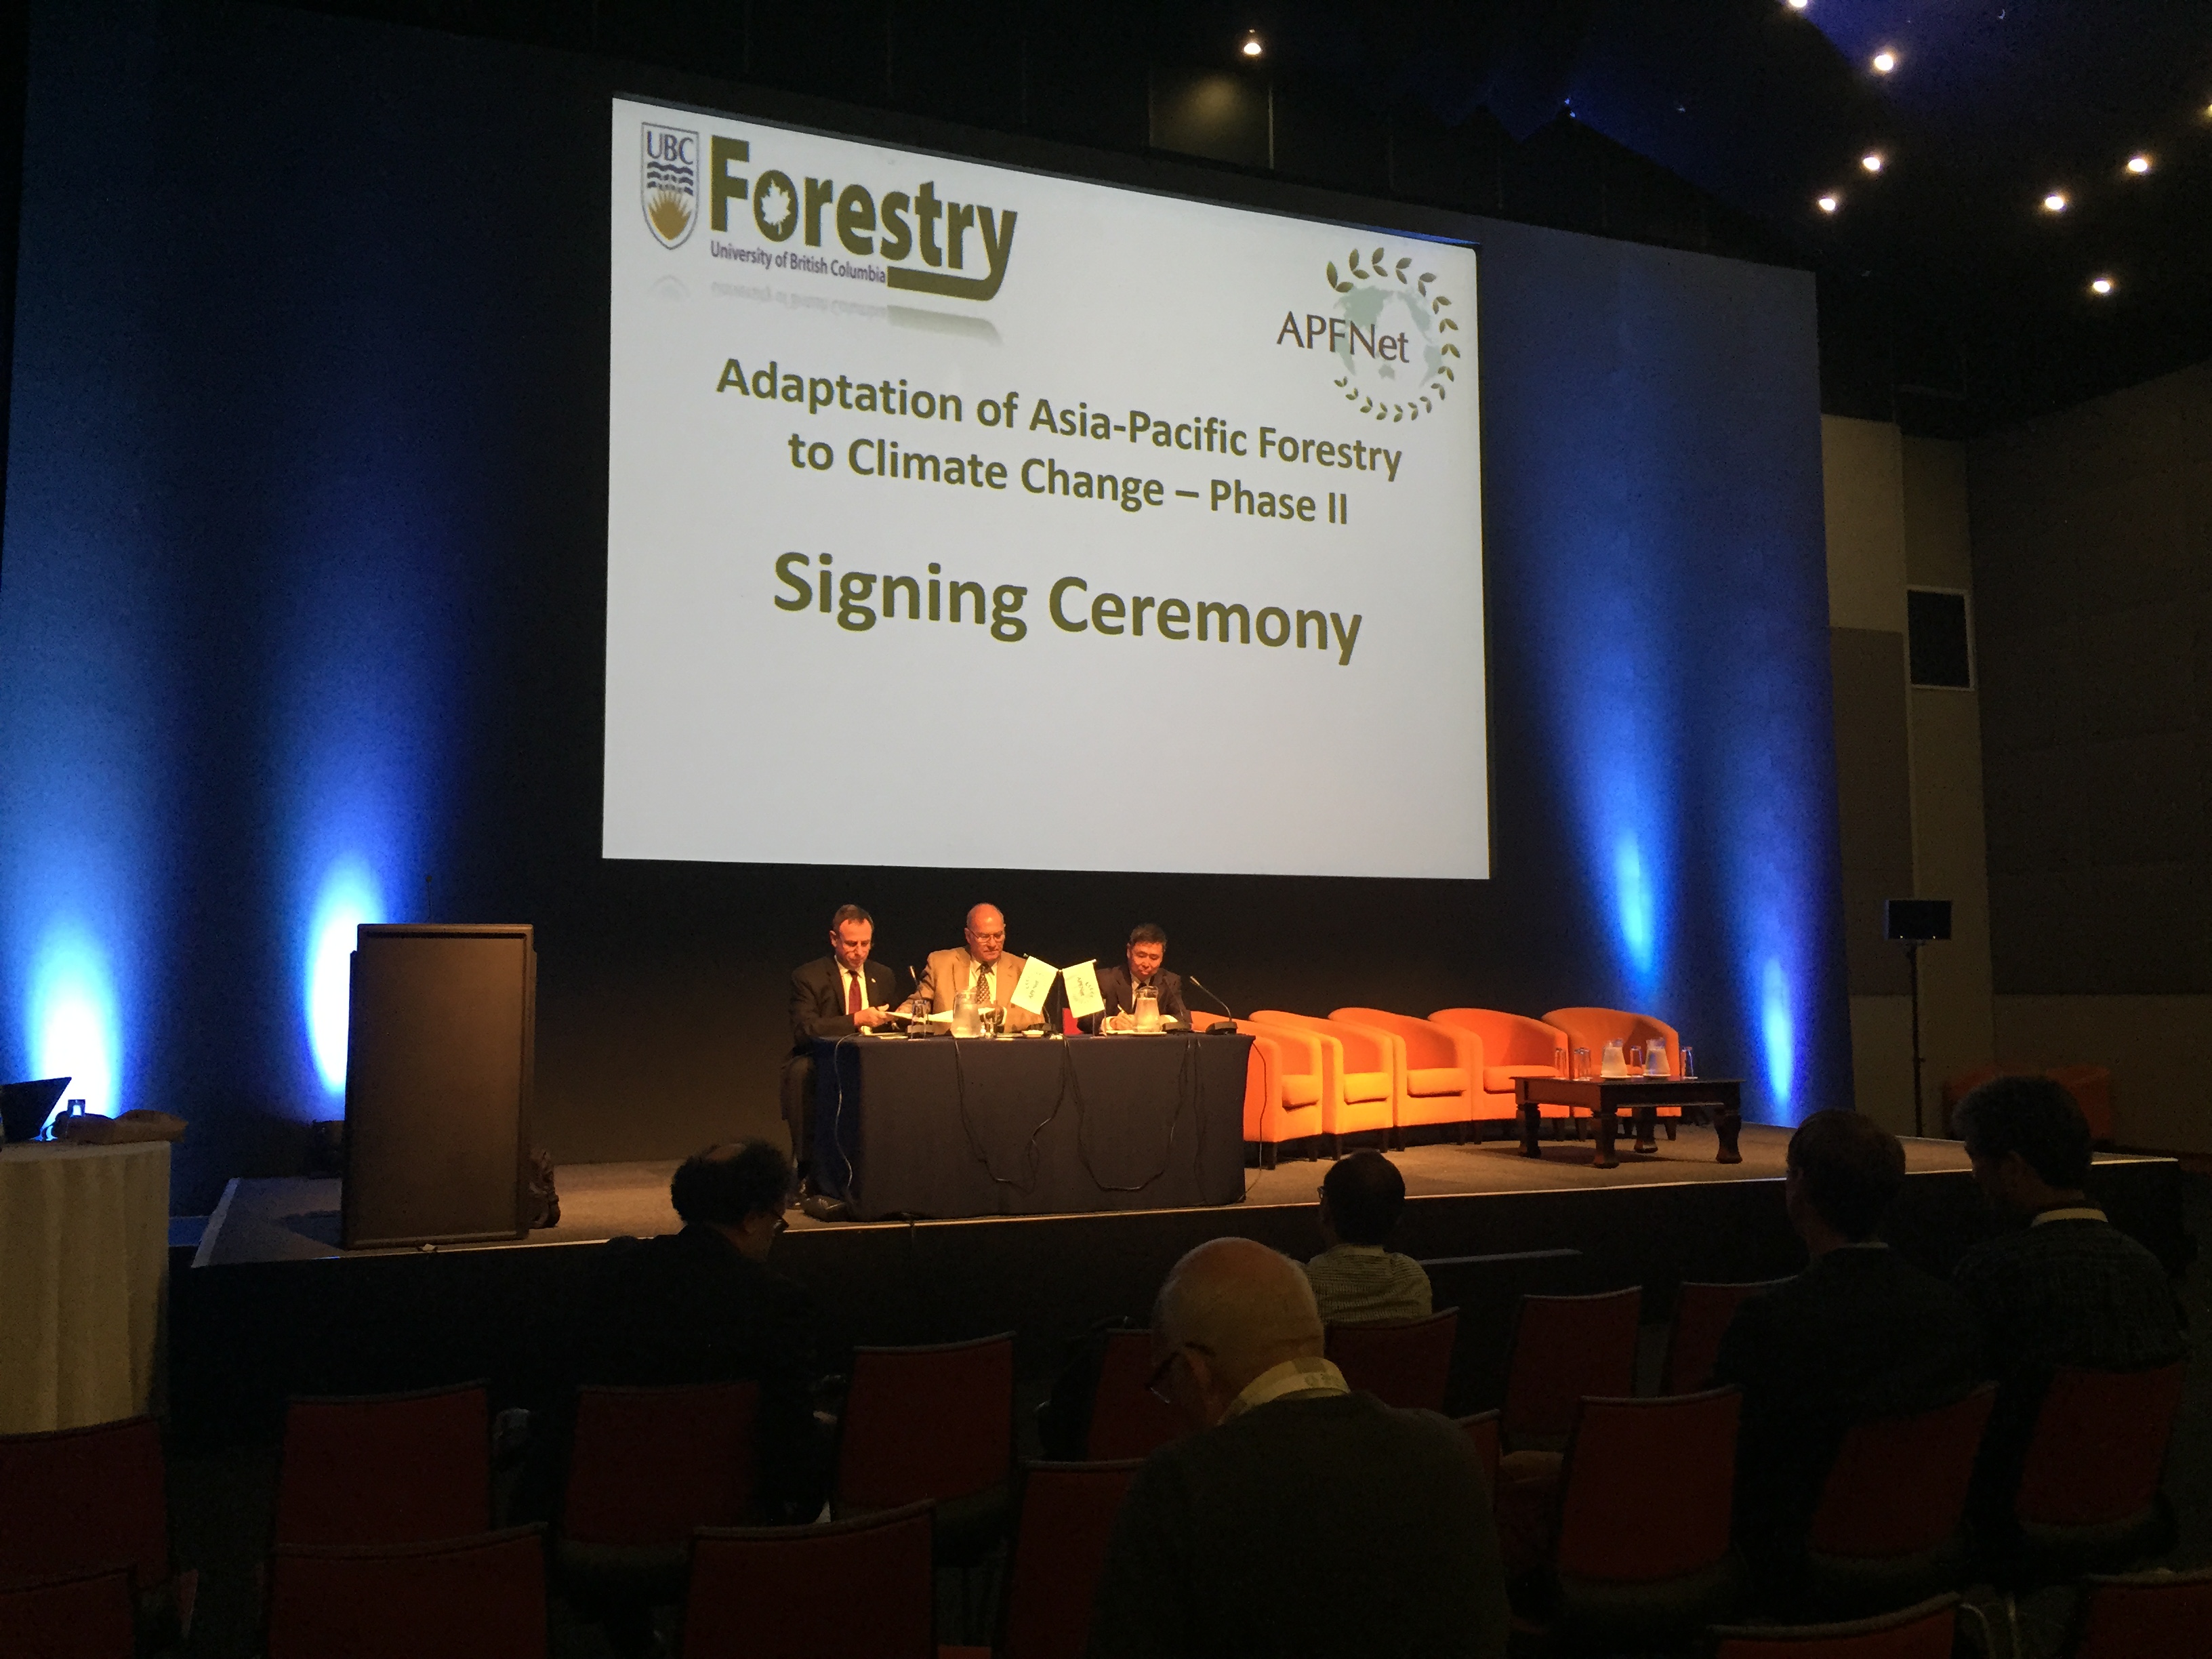 World Forestry Congress Climate Change Adaptation of AsiaPacific Forests